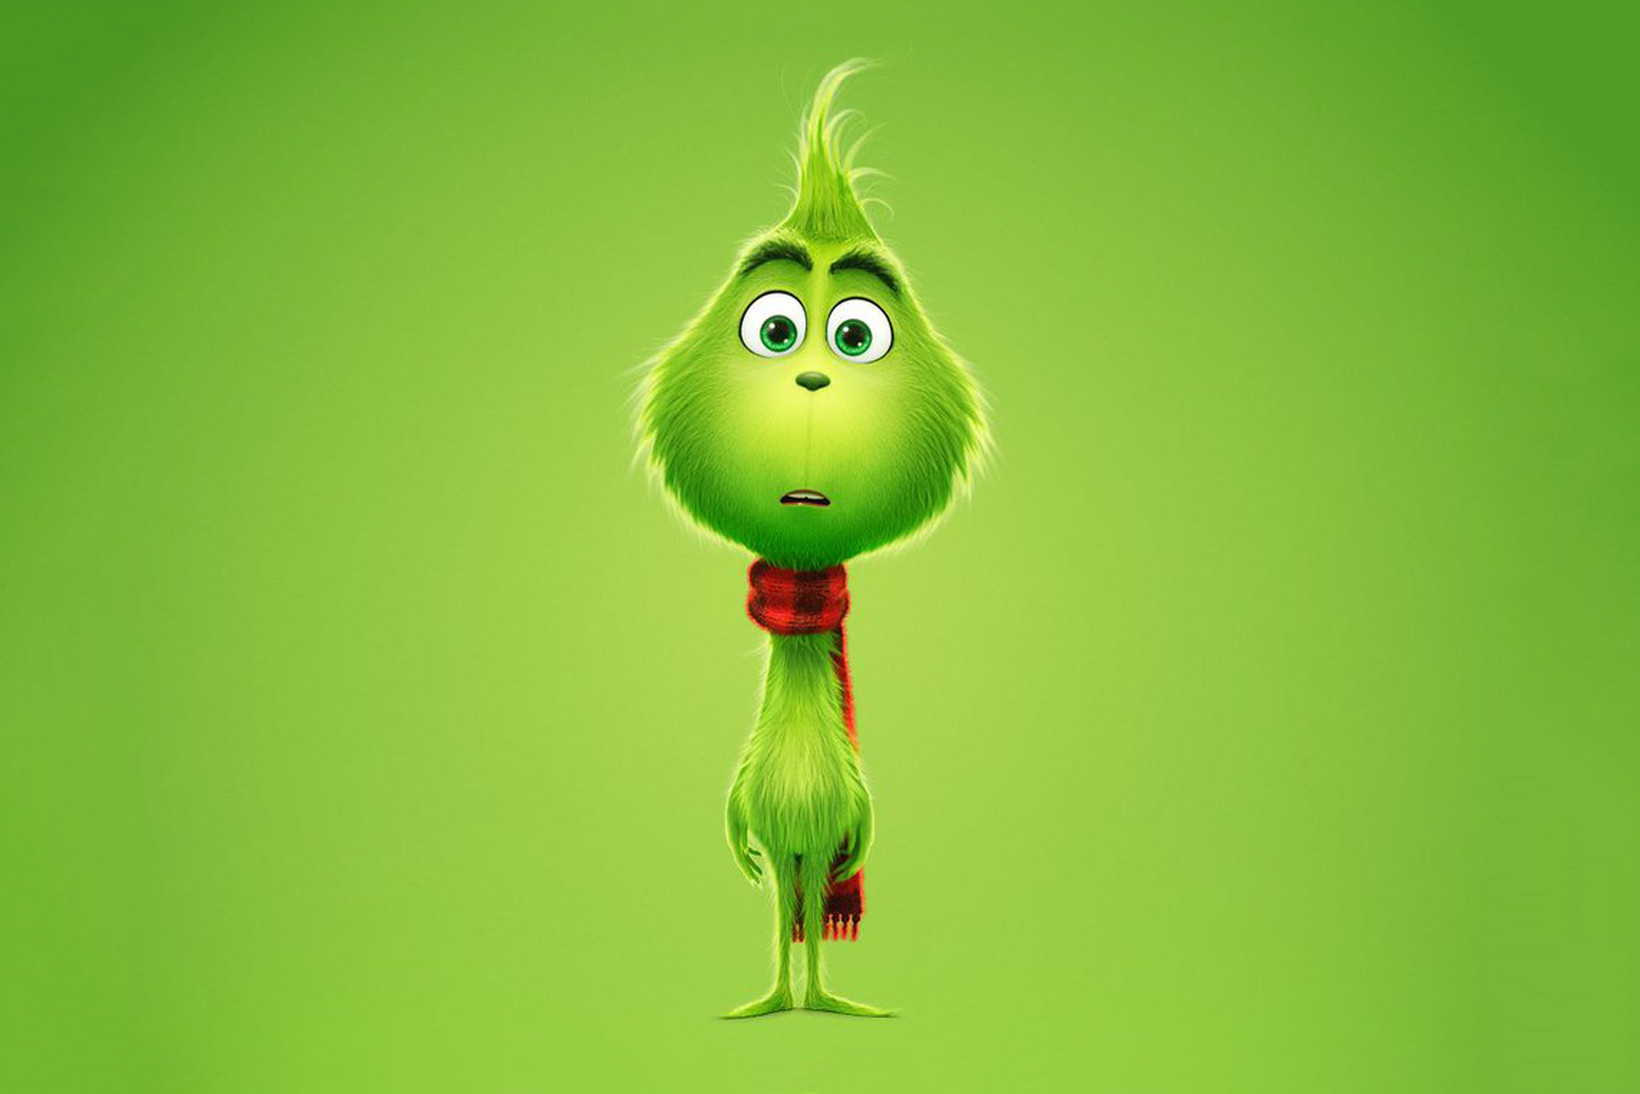 the grinch clipart